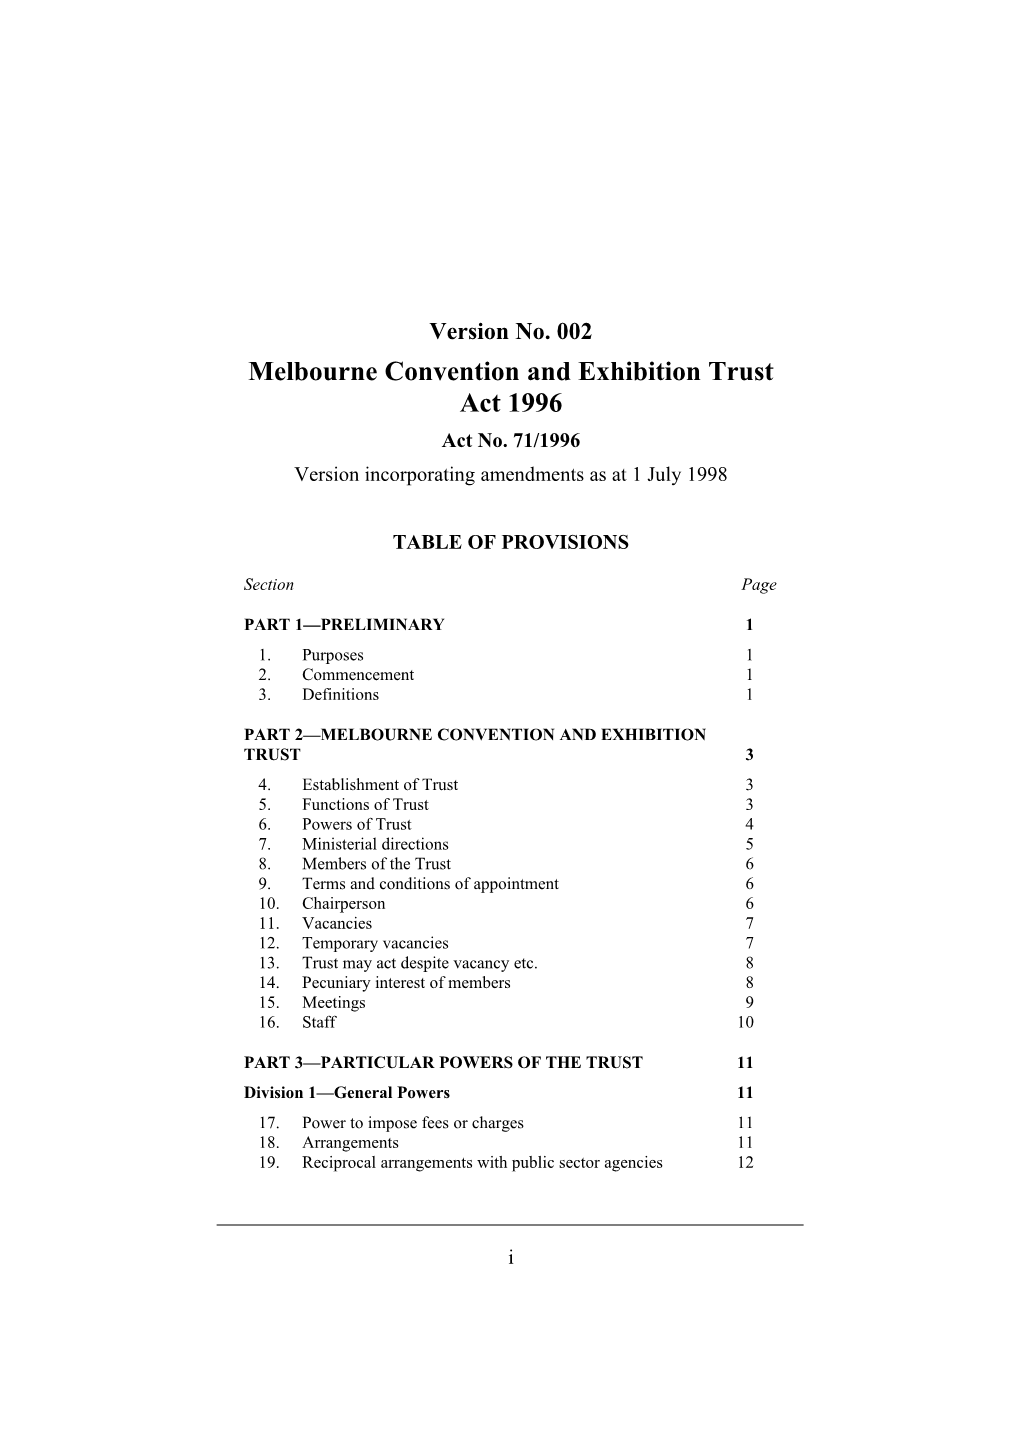 Melbourne Convention and Exhibition Trust Act 1996